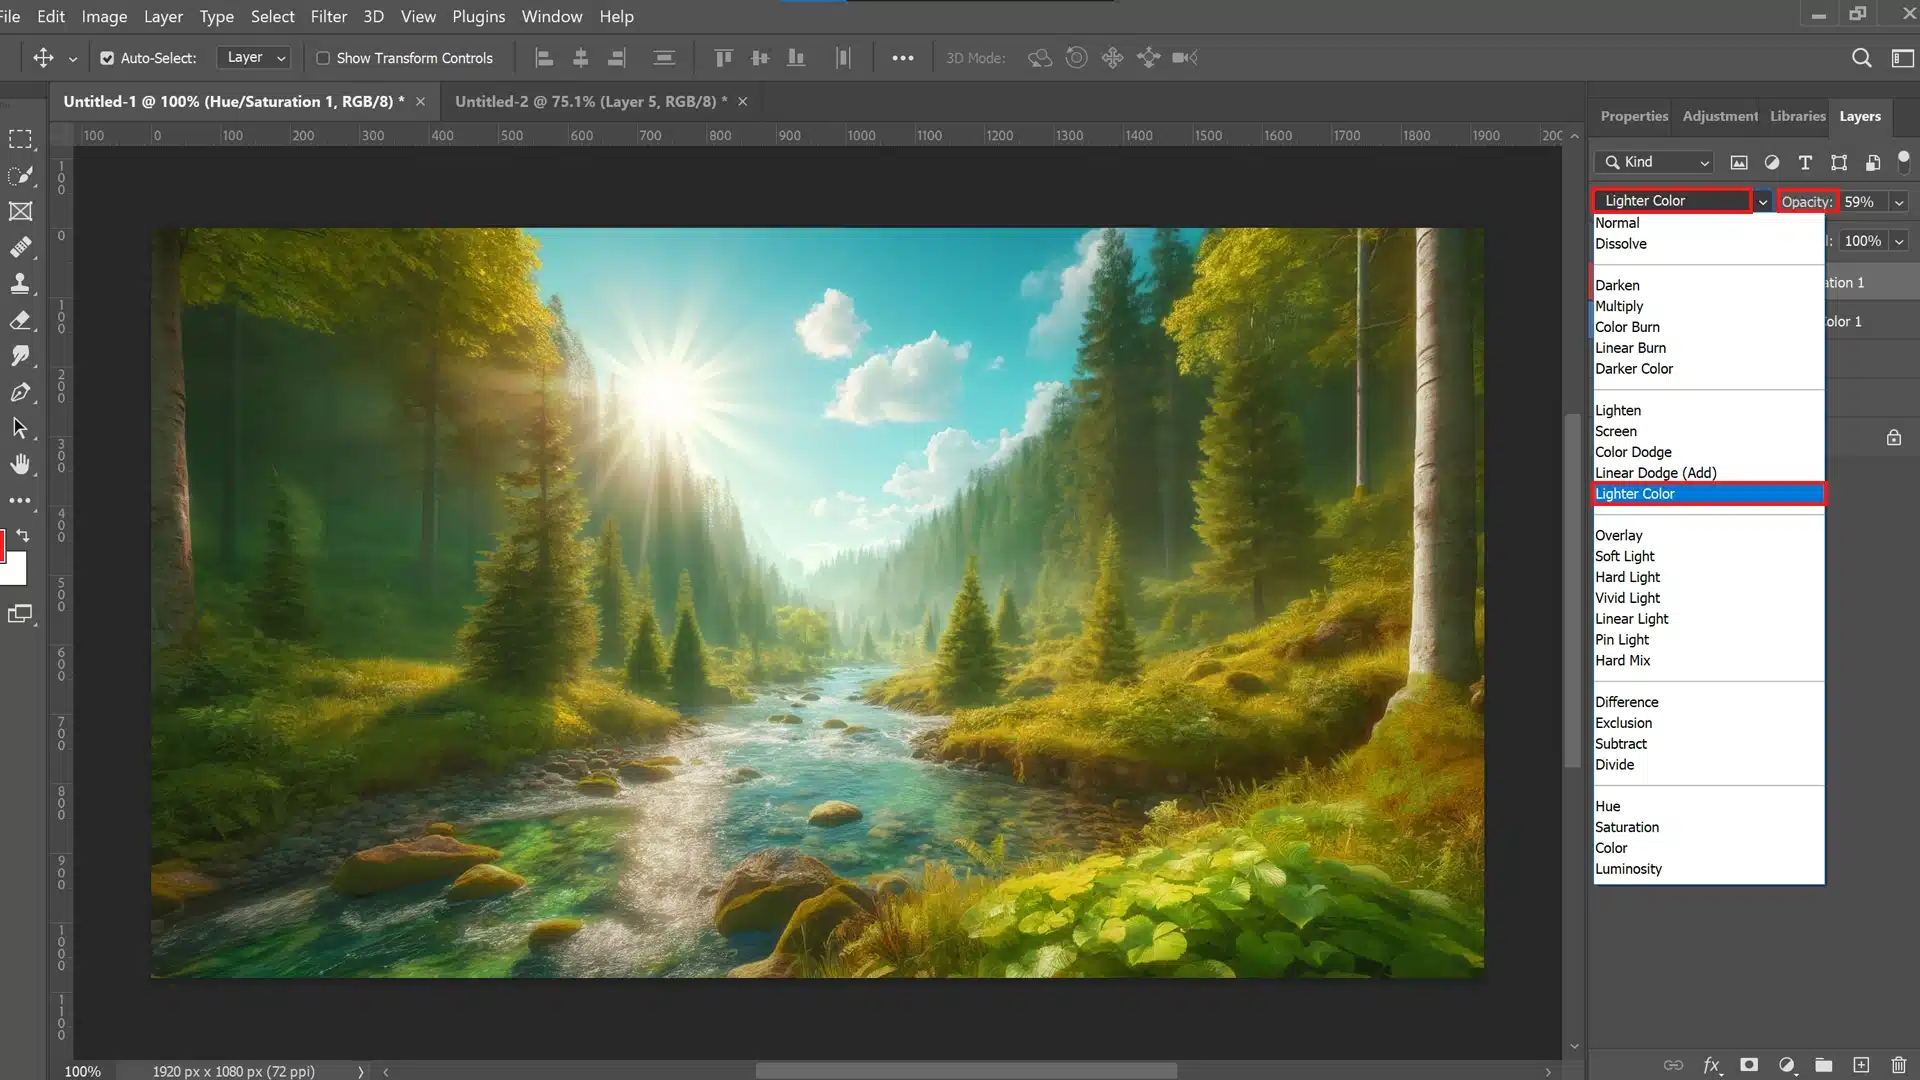 Adobe Photoshop showing a forest landscape on the canvas. The Layers panel is open, and the blending mode is set to 'Lighter Color' with the opacity adjusted to 59%.